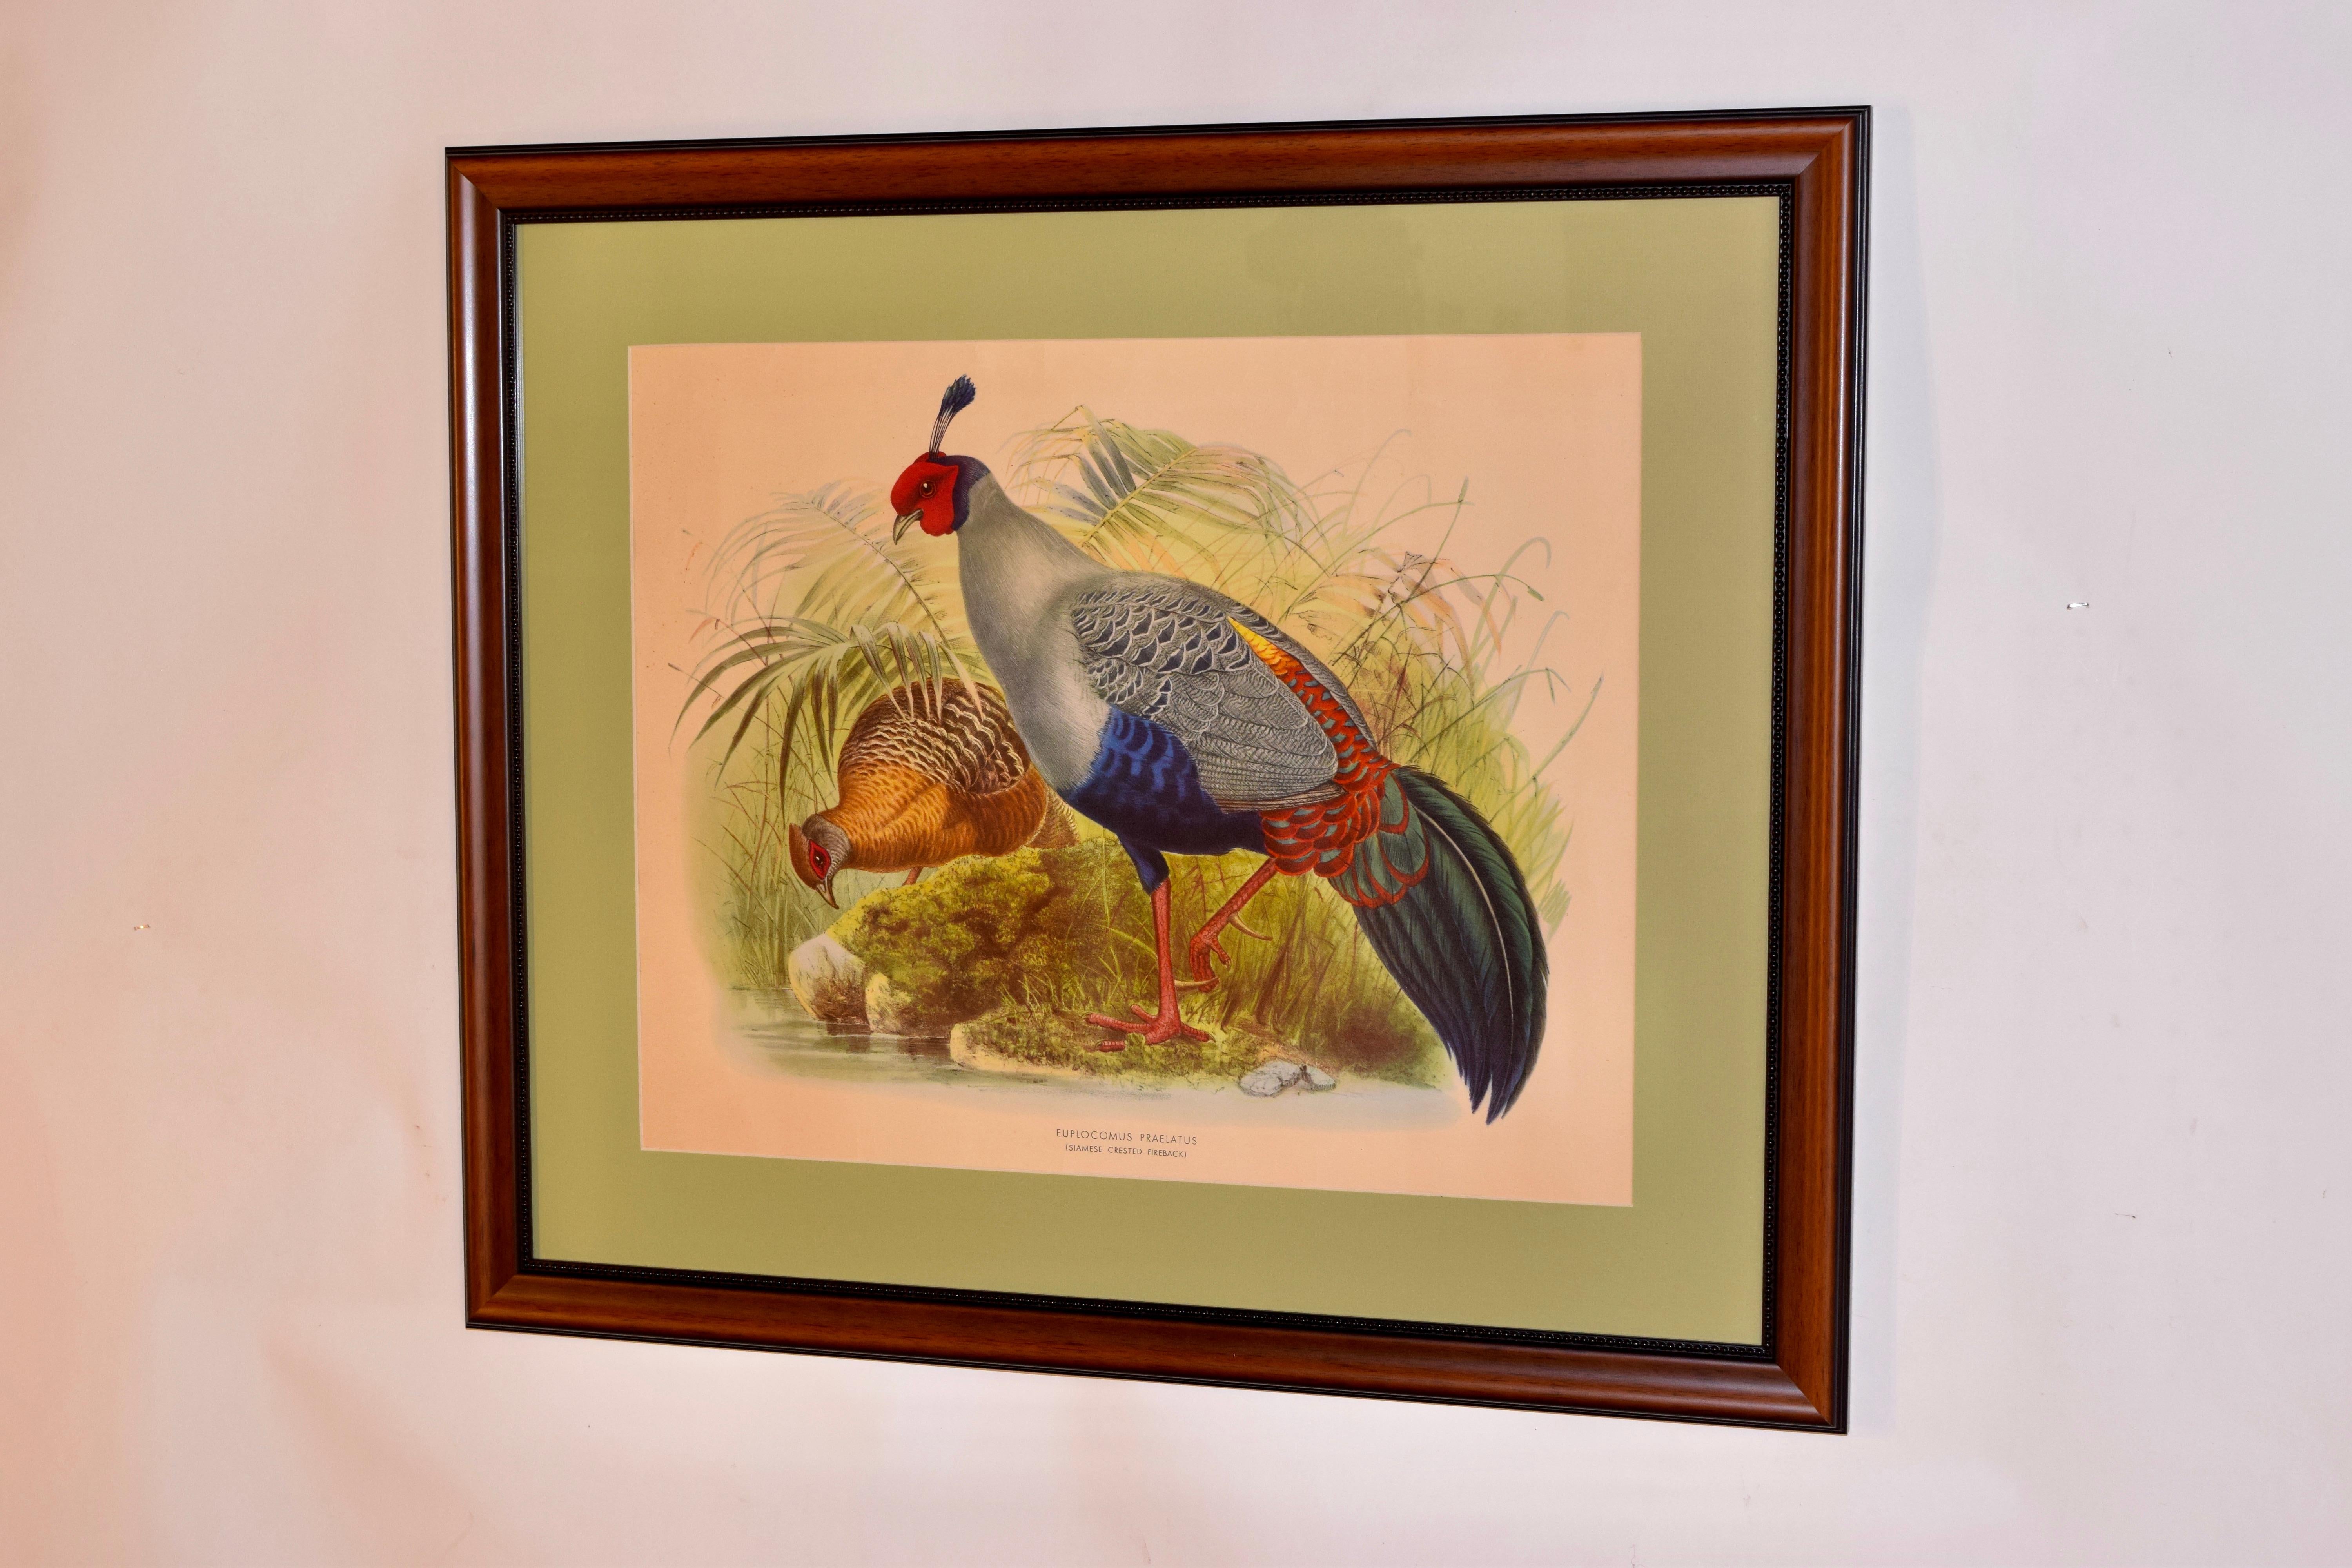 Mid-20th century framed lithograph of a Siamese crested fireback, which is a large pheasant. The colors are vibrant and lovely. The piece has been newly framed with contrasting sage matting.